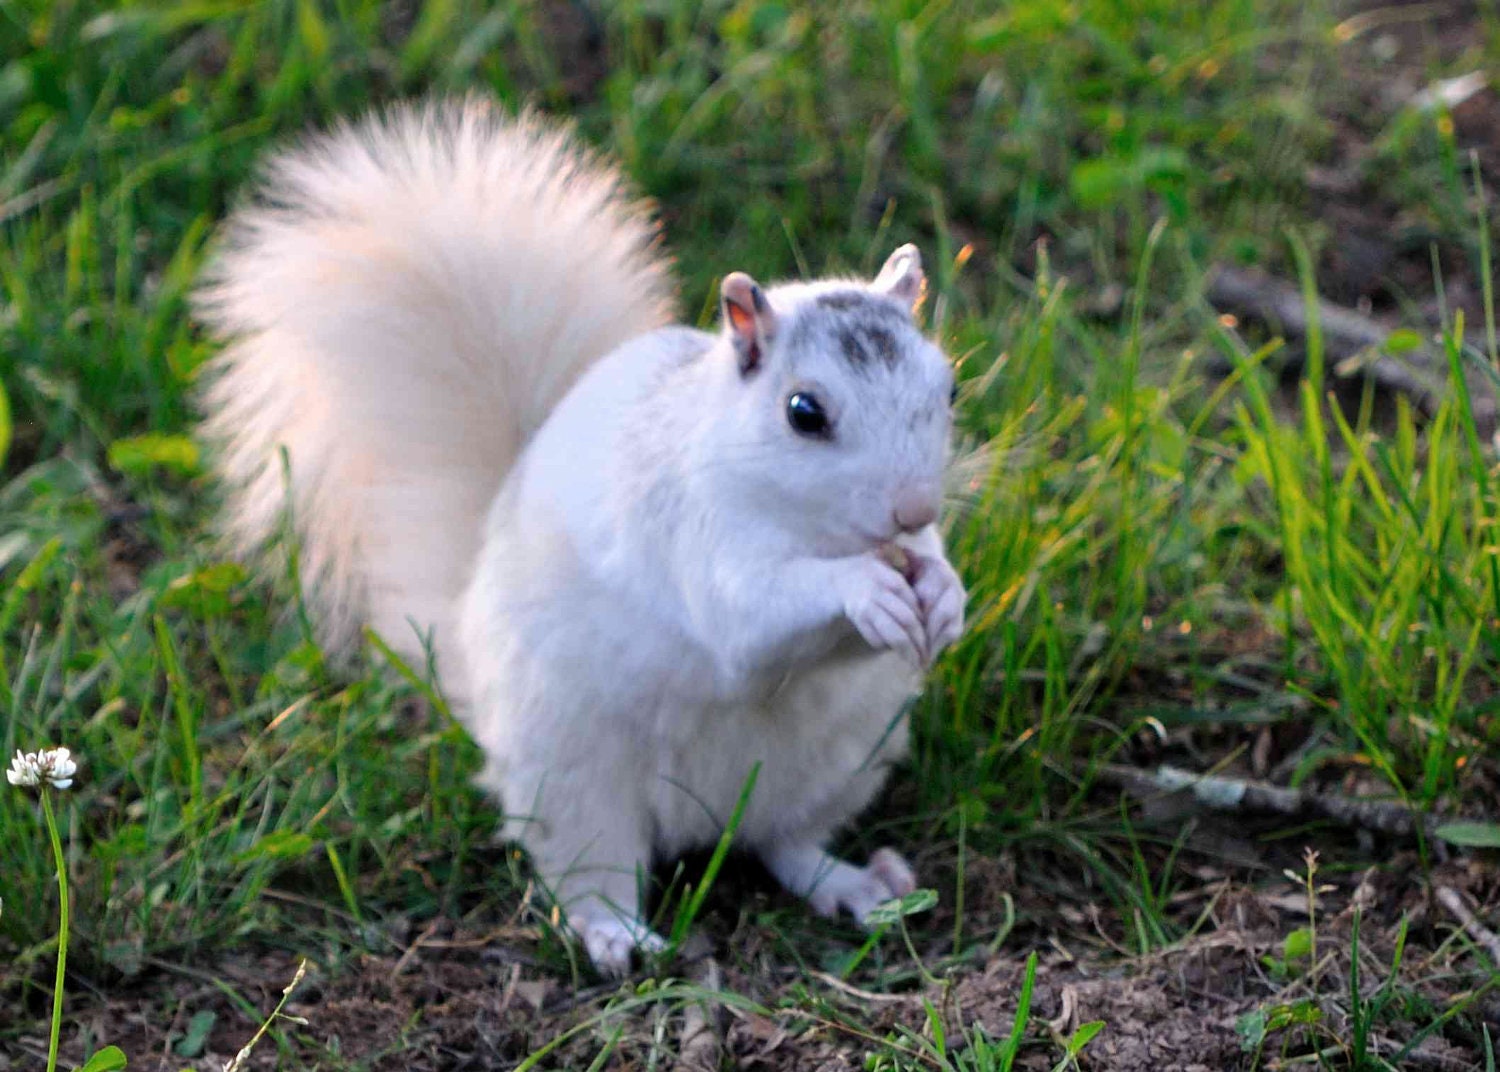 Brevard White Squirrel. High quality color by RobertJPhotography